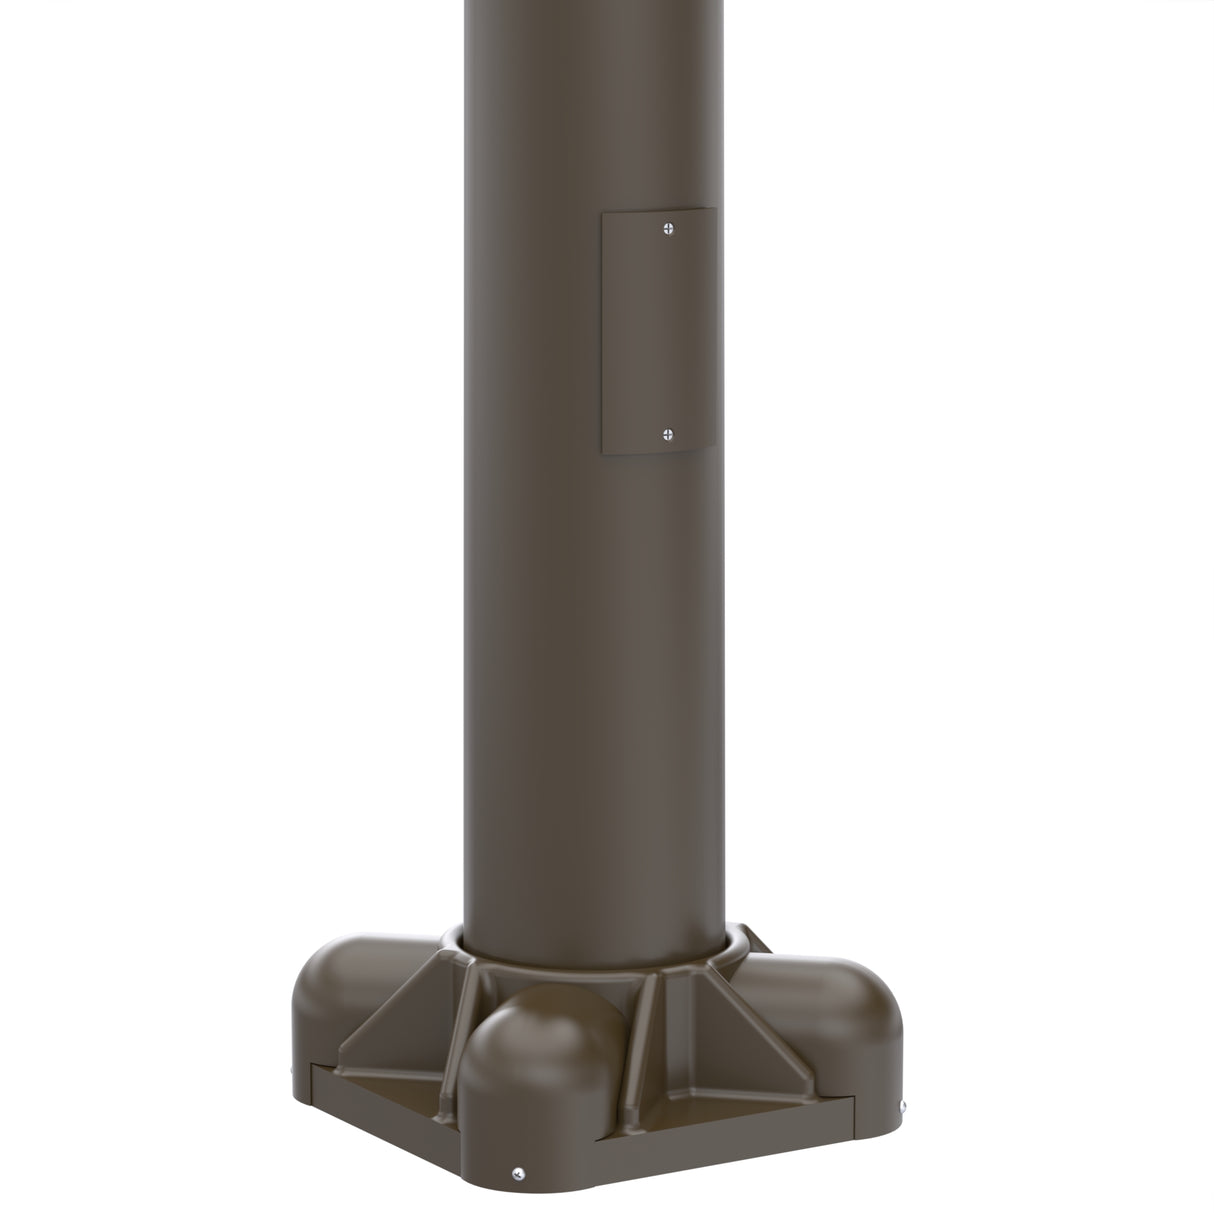 16' Tall x 5.0" Base OD x 3.0" Top OD x 0.156" Thick, Round Tapered Aluminum, Anchor Base Light Pole